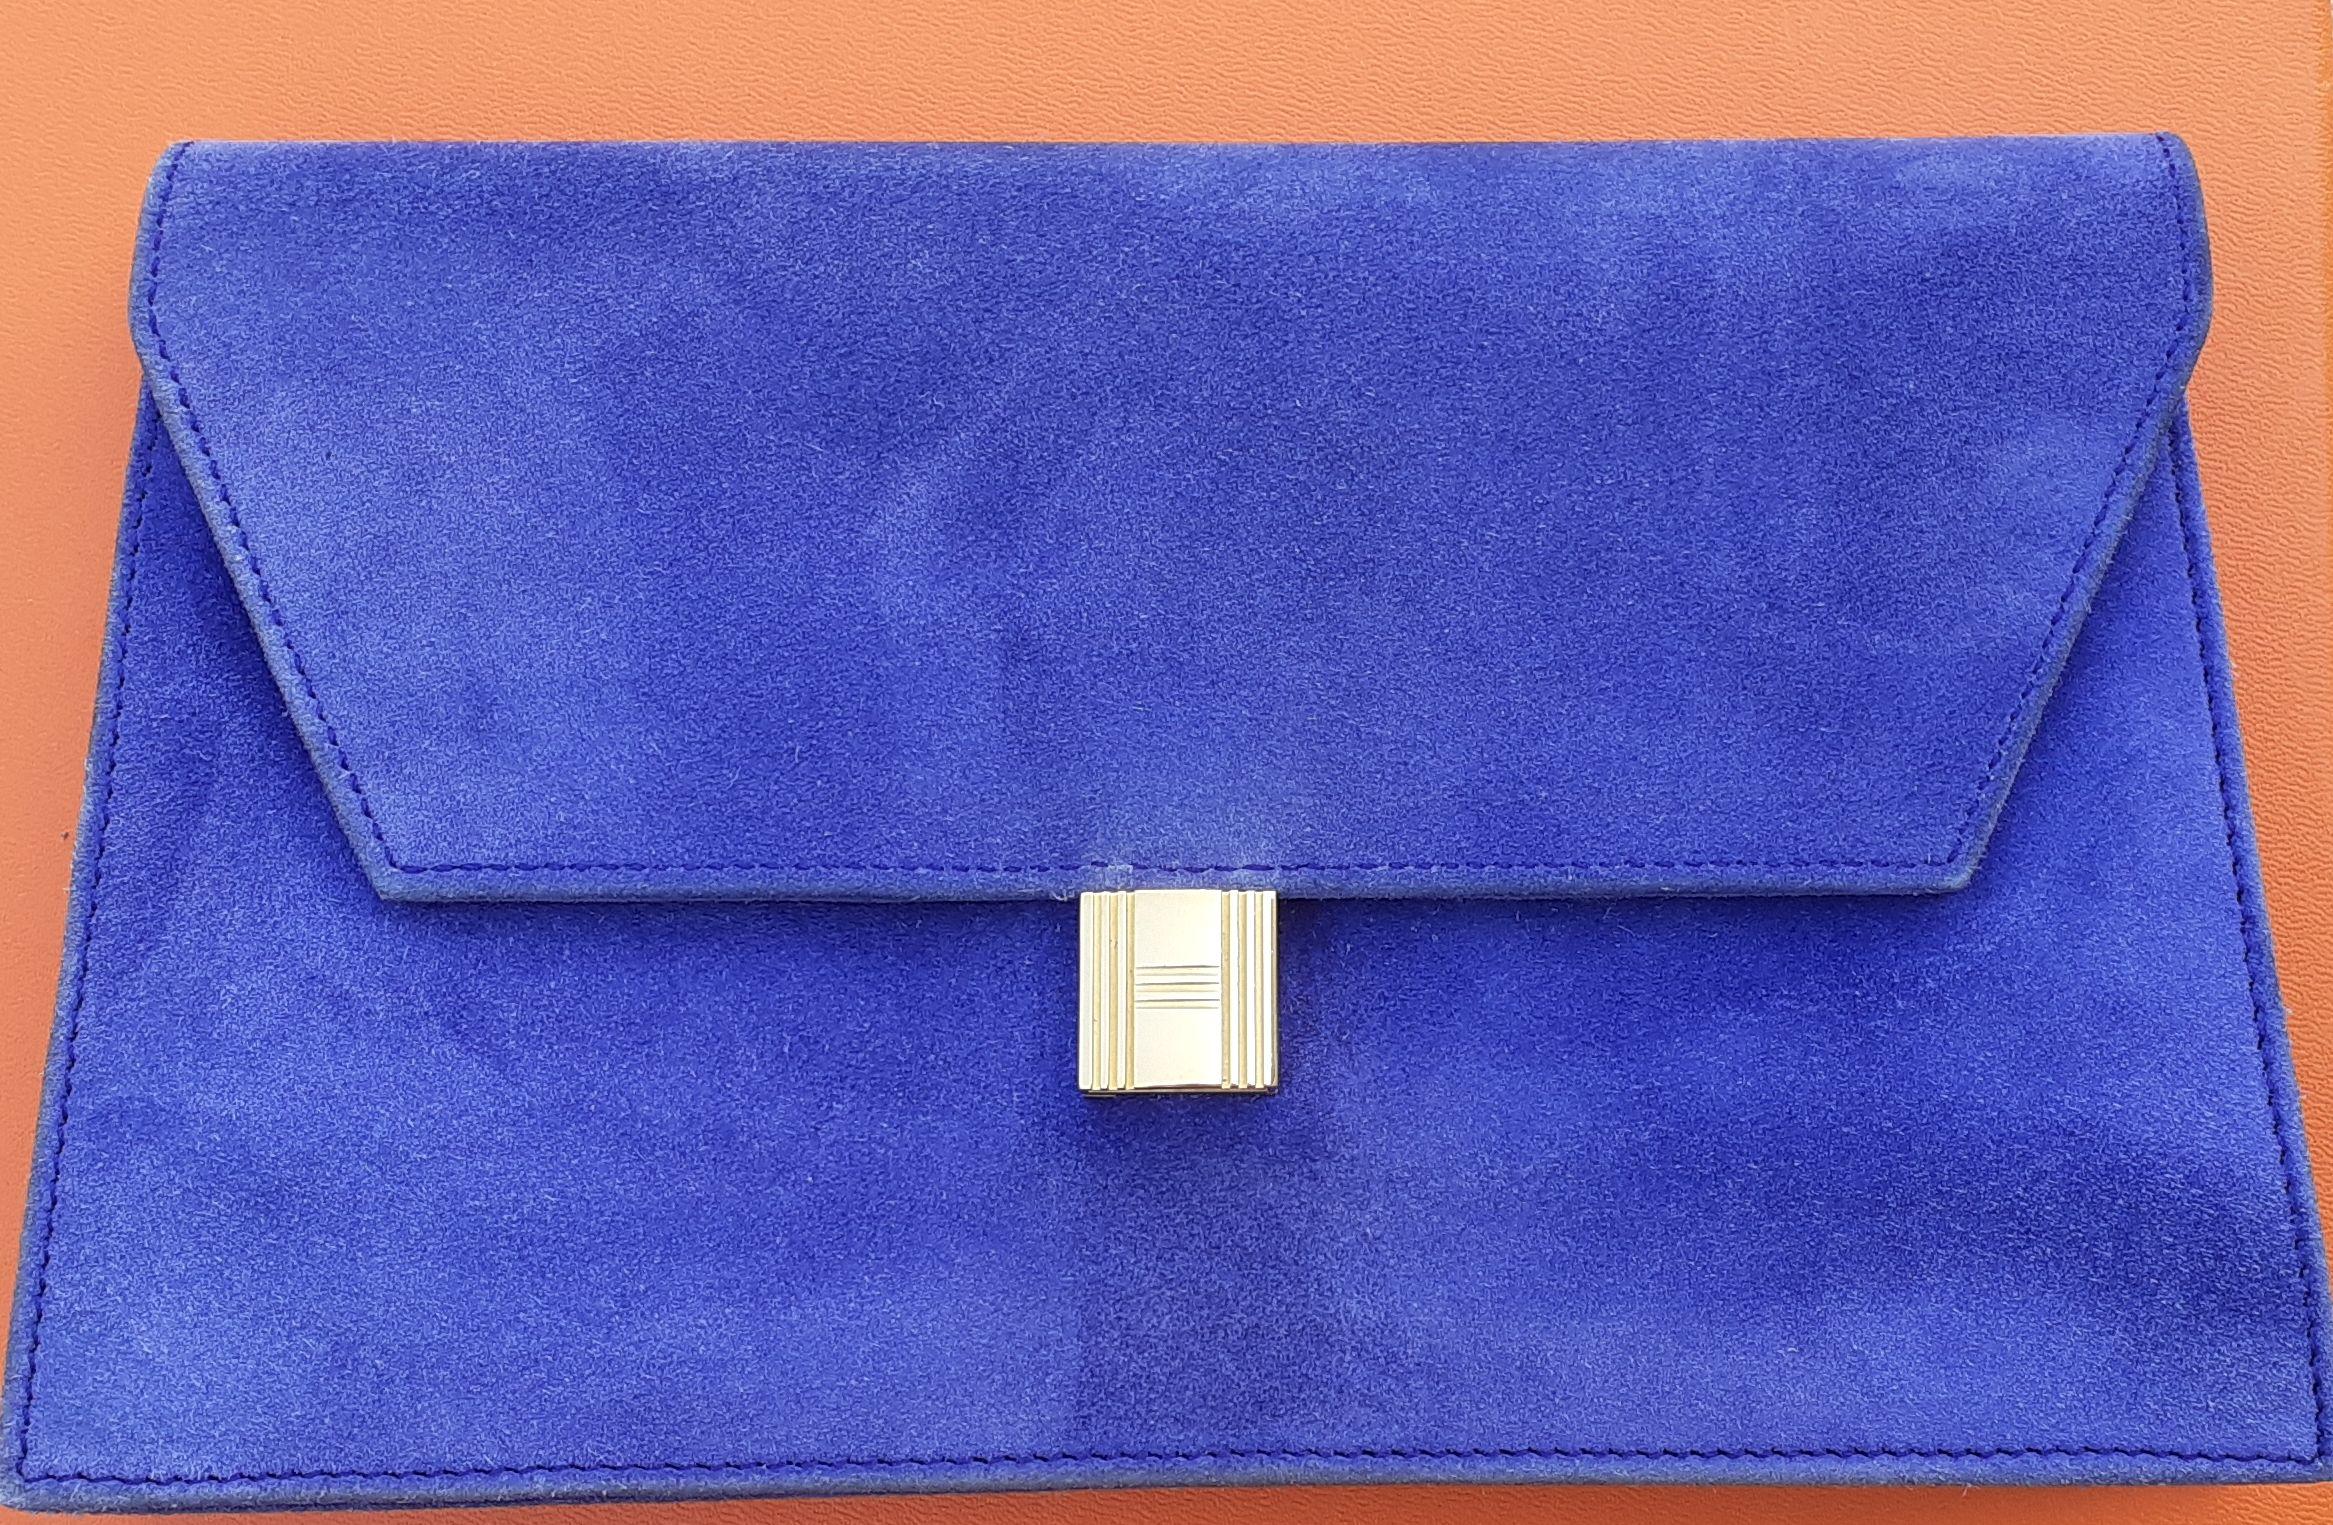 Lovely and Rare Authentic Hermès Clutch

Called 